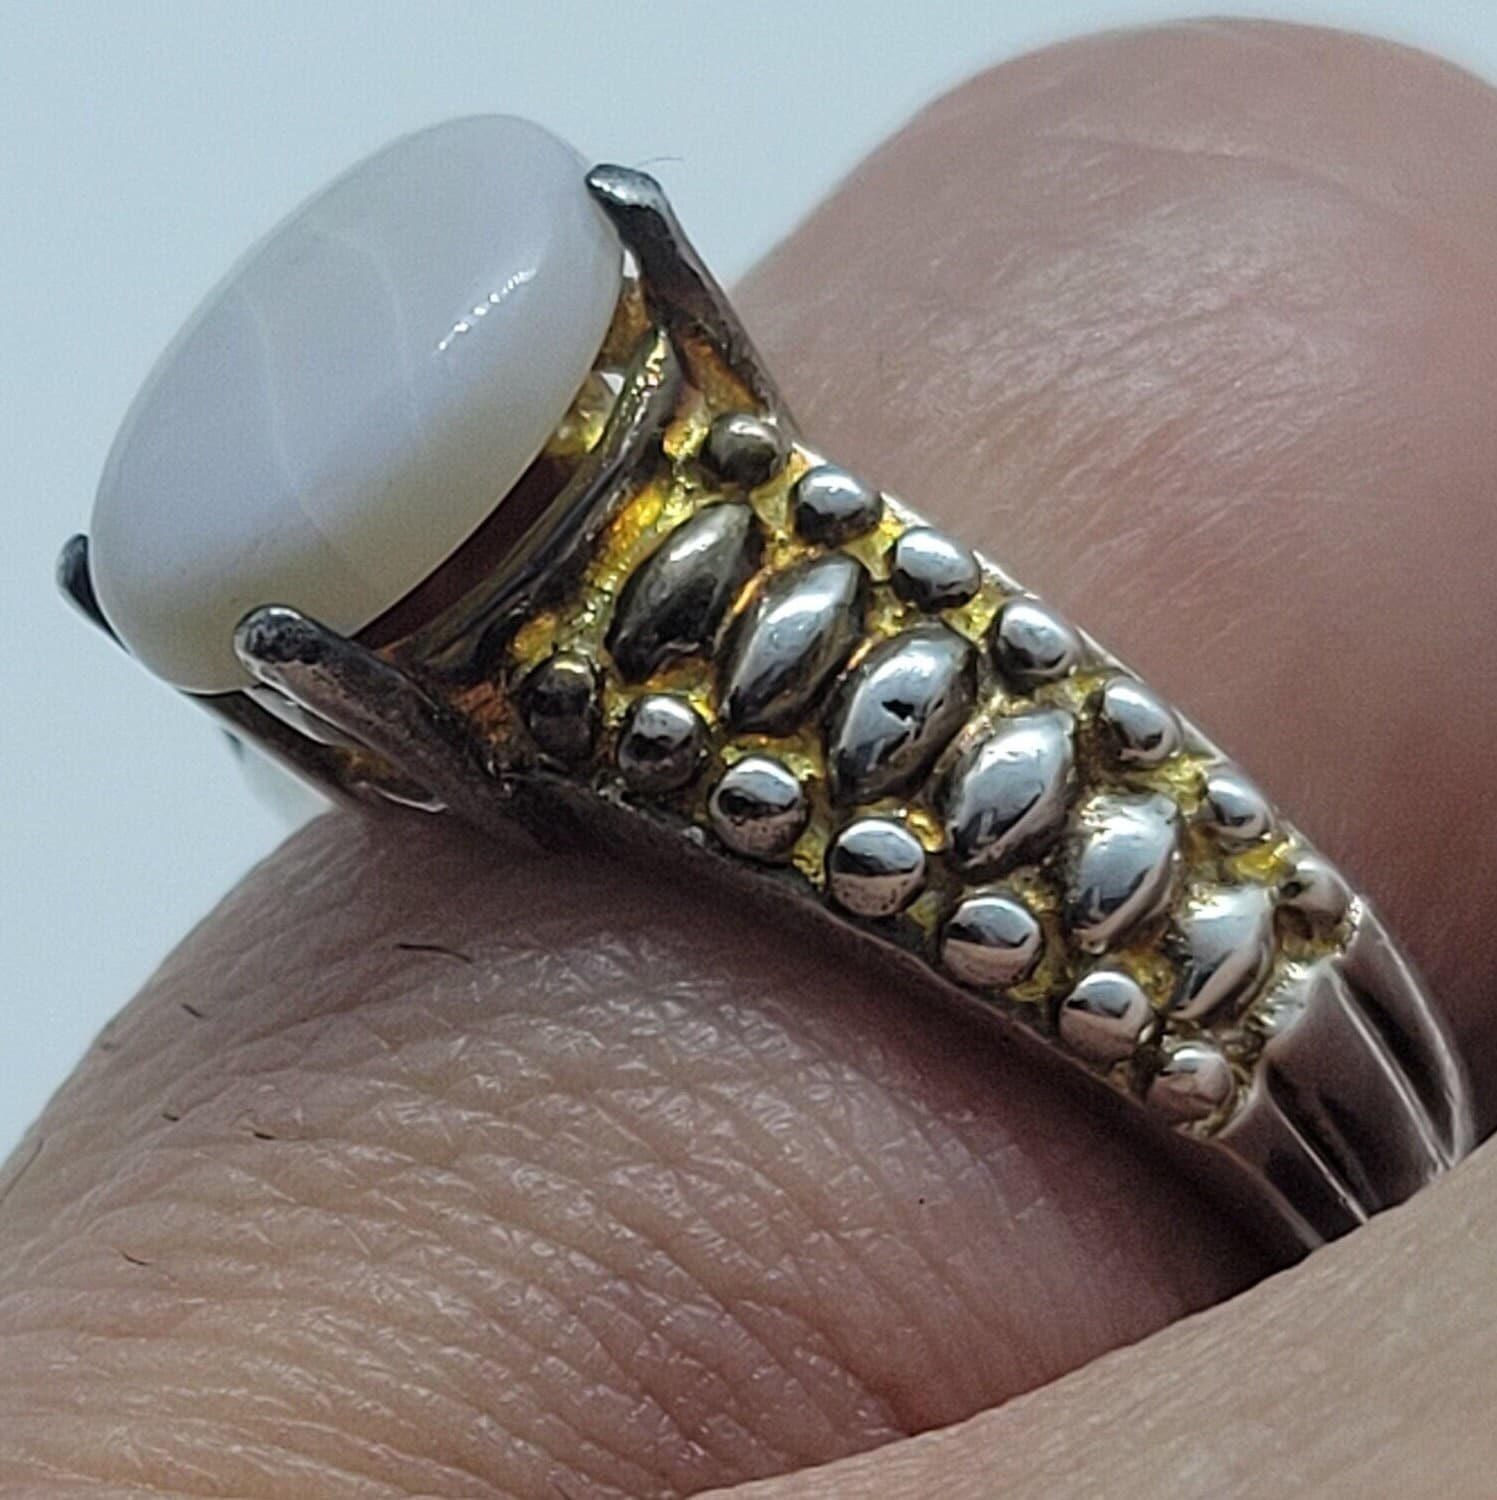 White Fire Opal Ring in 925 Sterling Silver on finger